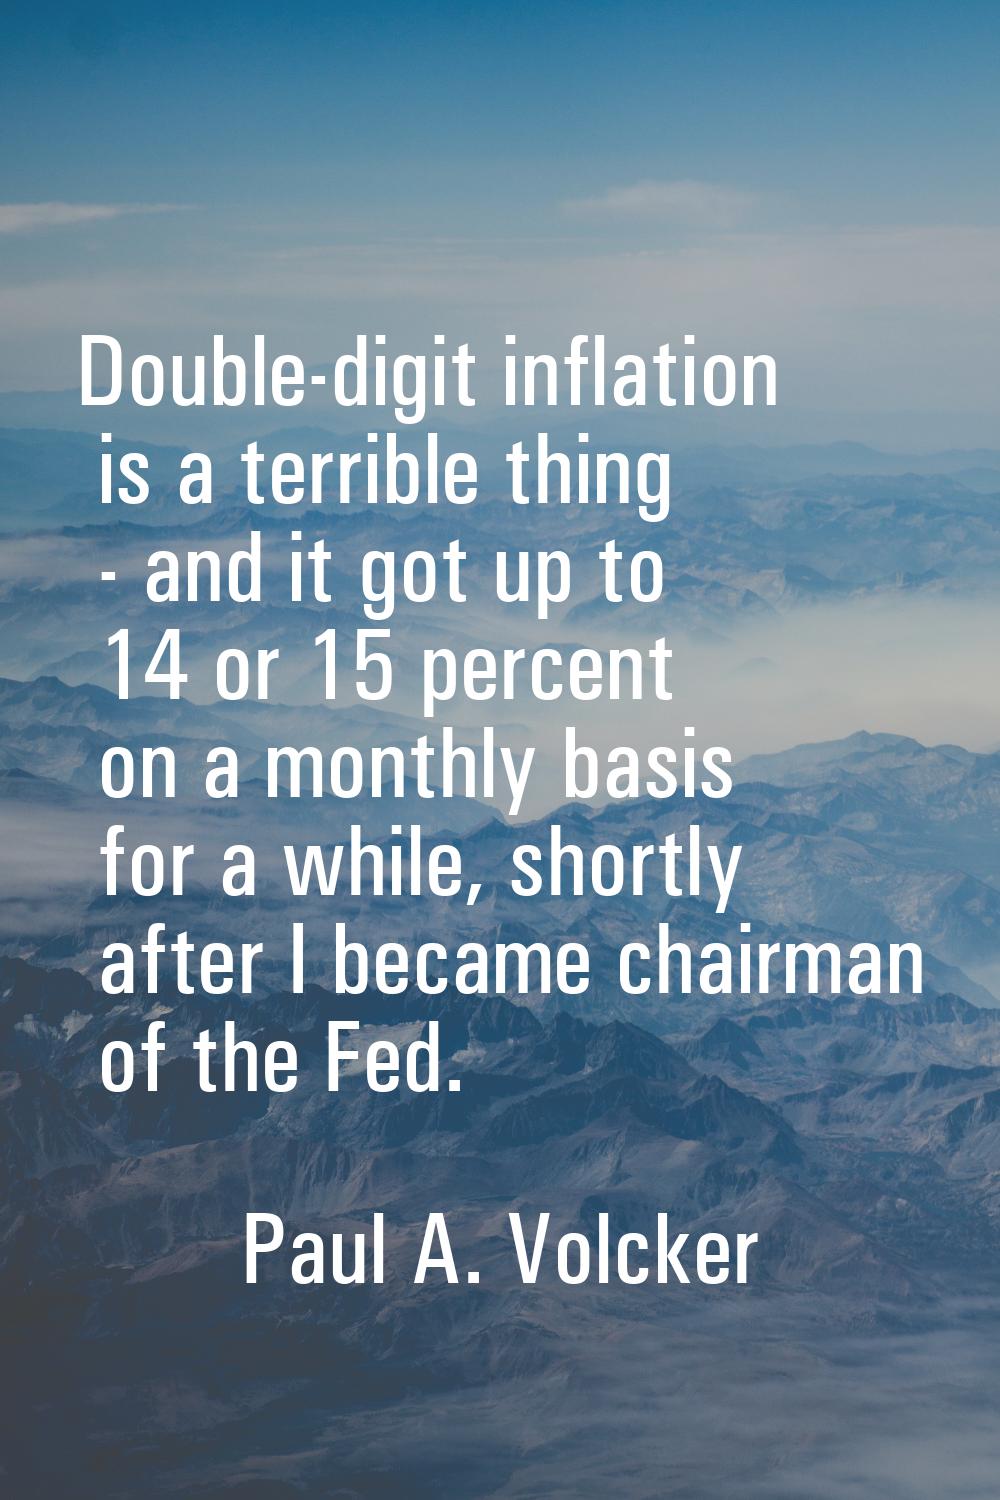 Double-digit inflation is a terrible thing - and it got up to 14 or 15 percent on a monthly basis f